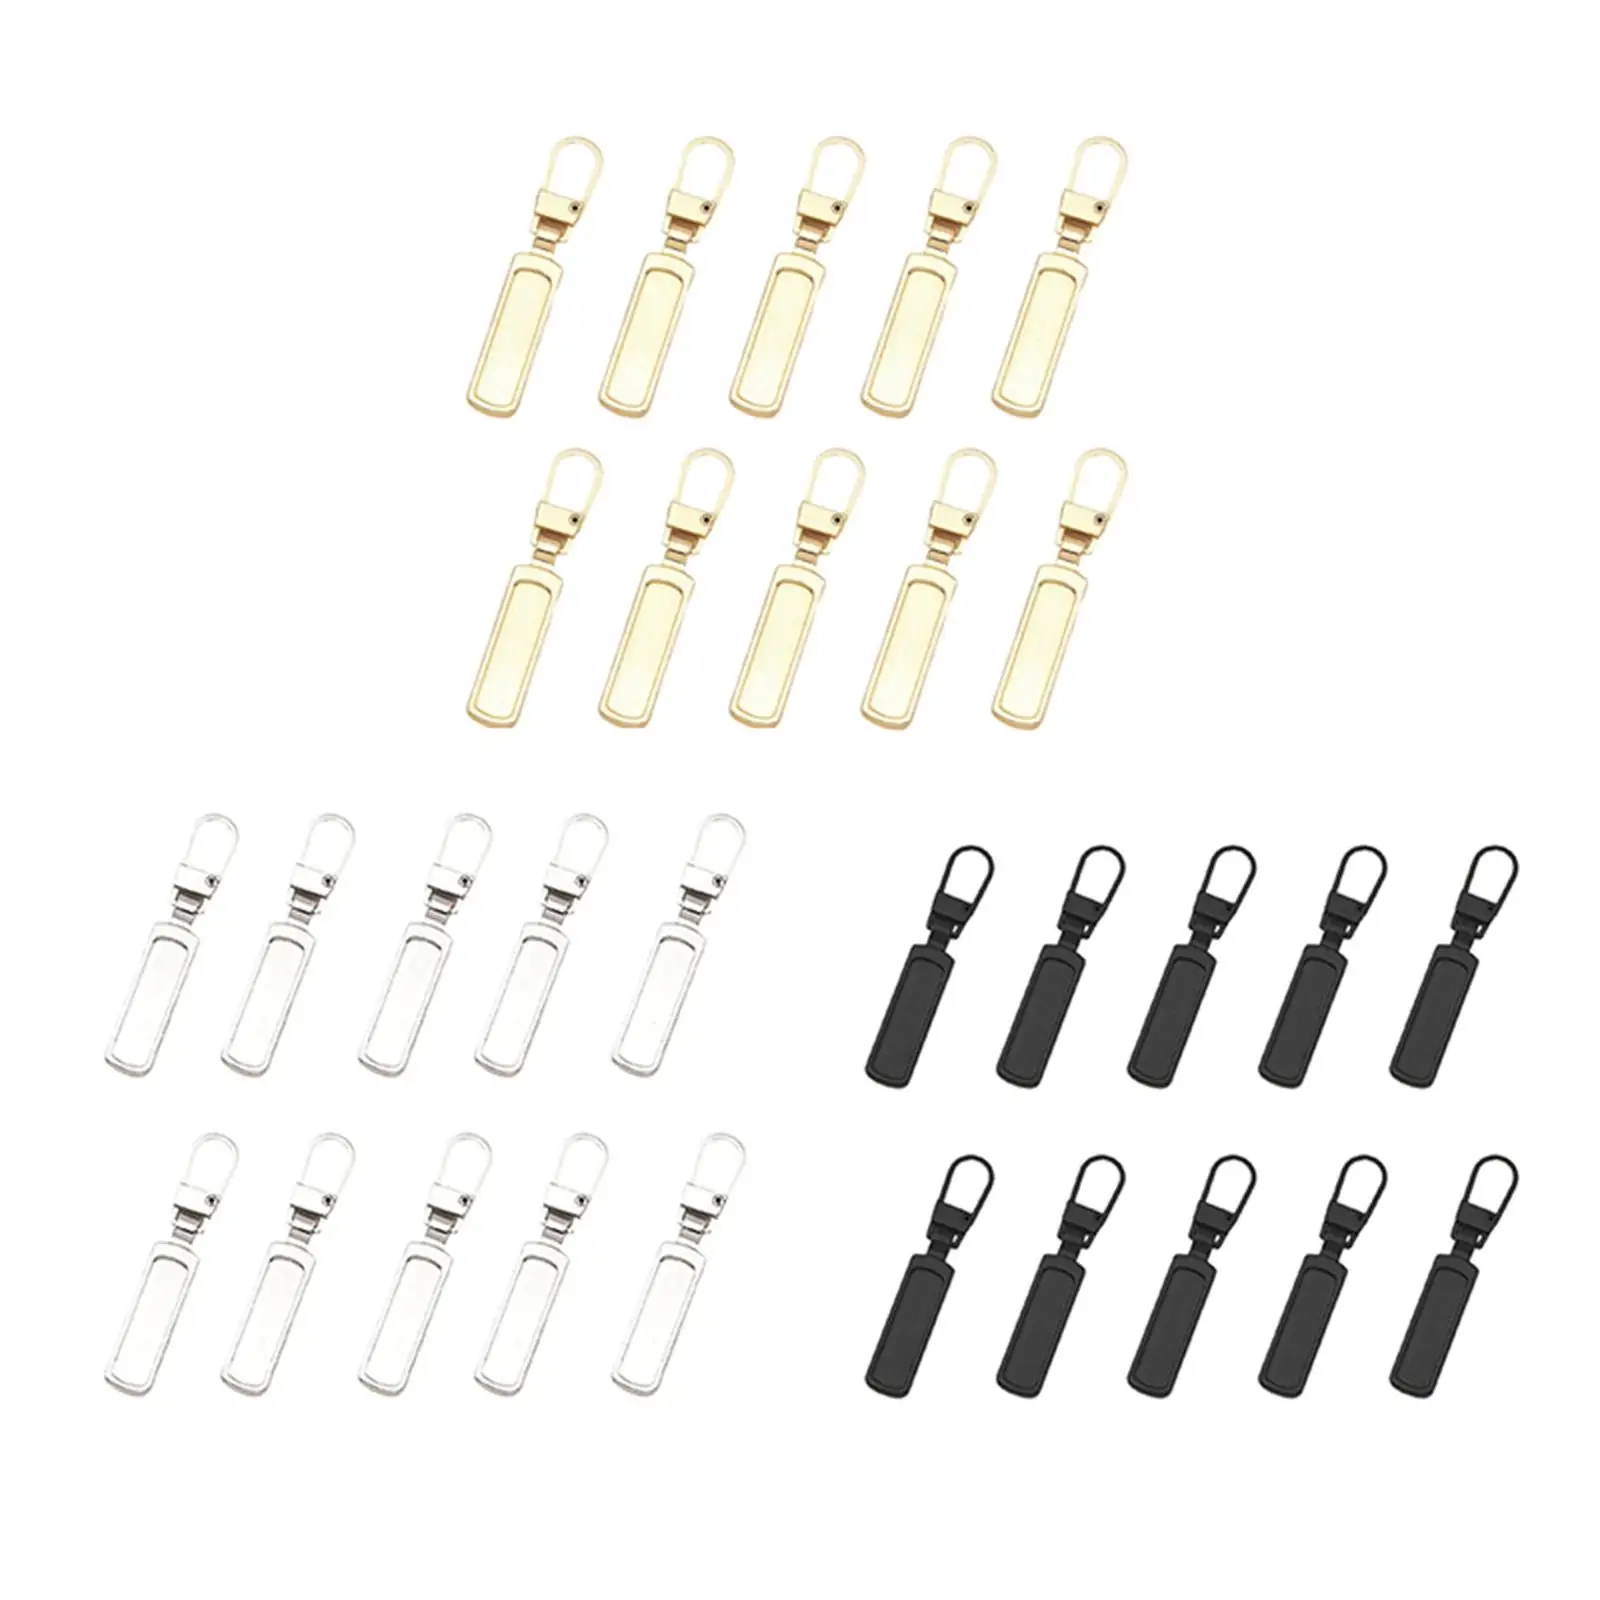 10x Metal Zipper Heads Repair Kit Replace Sewing Zip Tags Zip Pulls for Jackets Luggage Jeans Purses